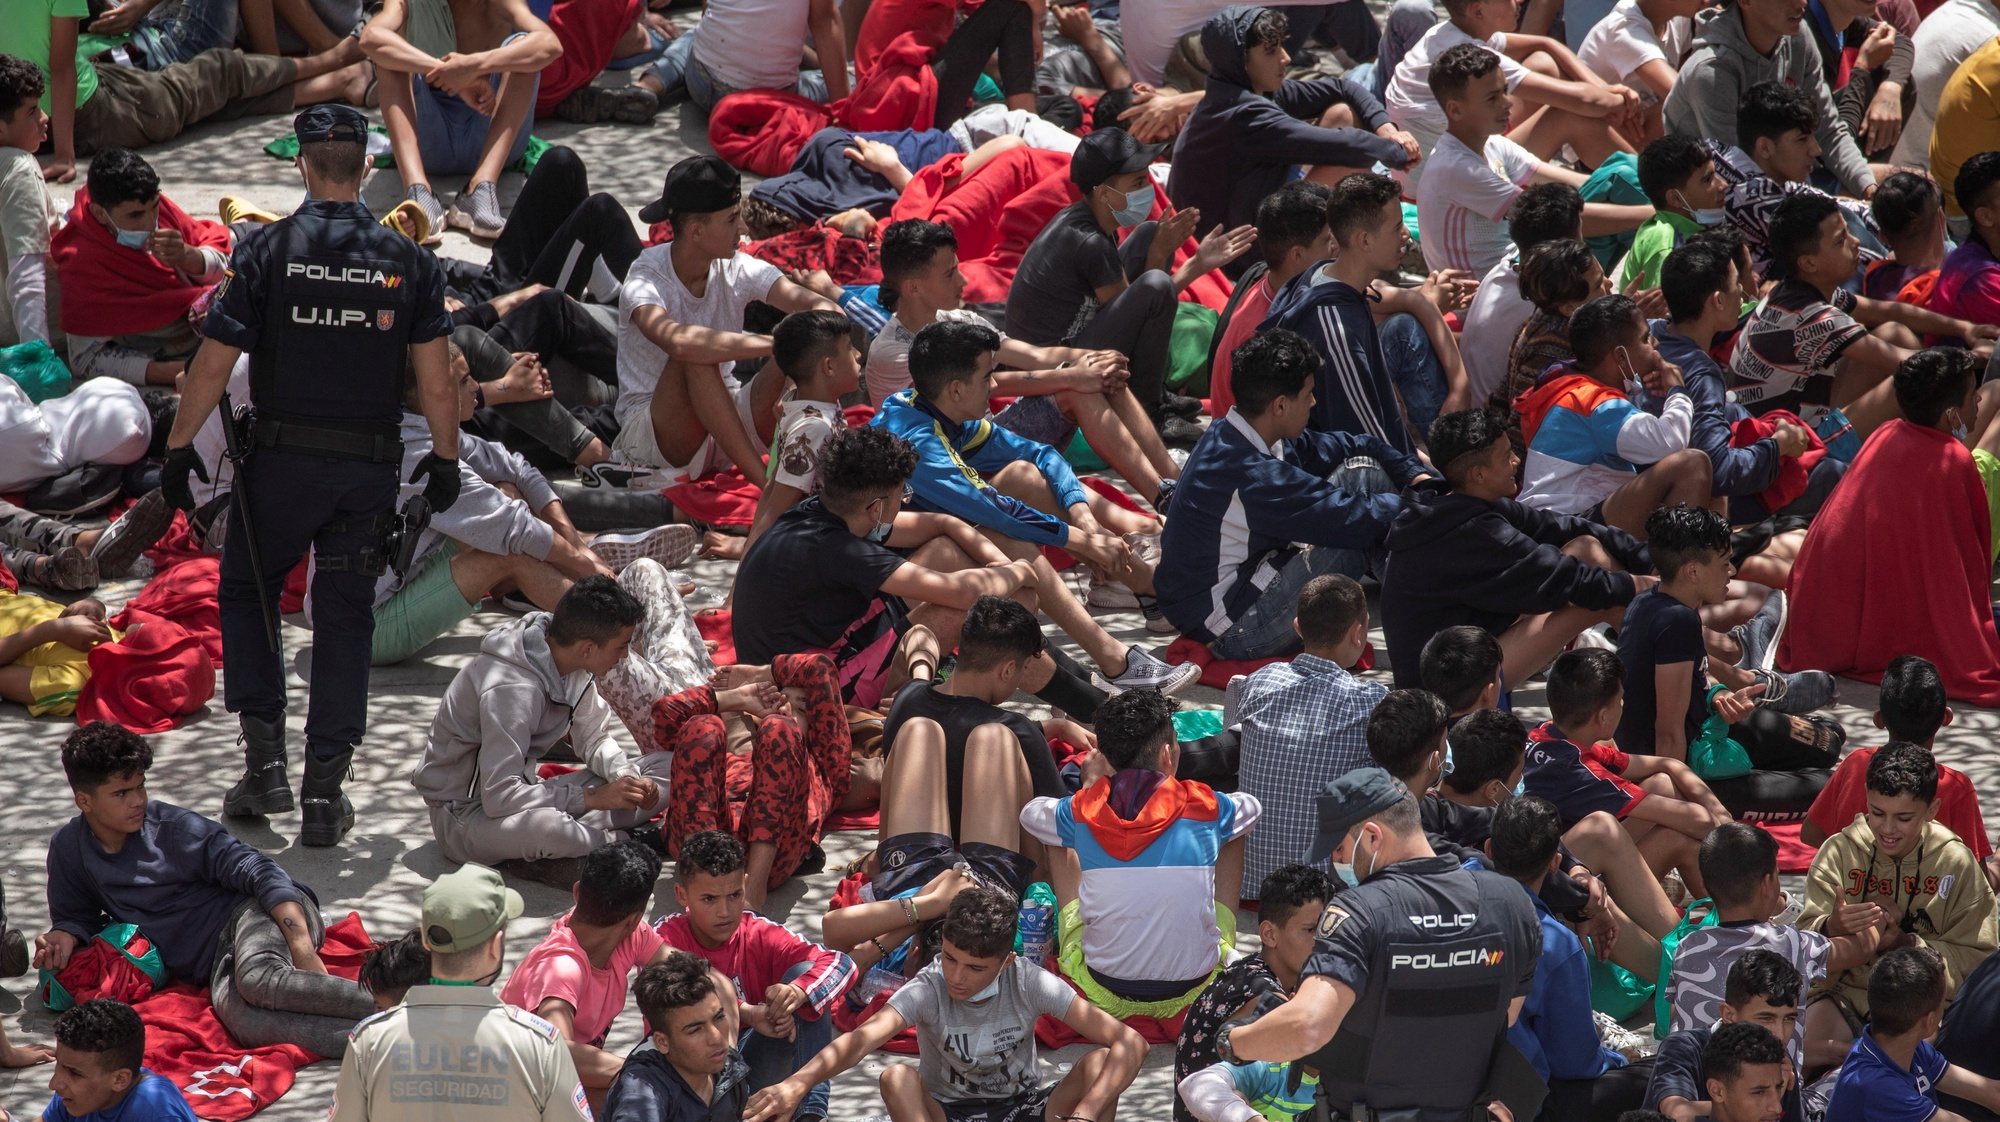 epa09218156 Migrants wait at an industrial estate next to Tarajal beach, in the city of Ceuta, Spanish enclave in northern Africa, 21 May 2021. Local authorities reported that between 8,000-10,000 migrants managed to enter Spain from 18 to 19 May.  EPA/BRAIS LORENZO ATTENTION EDITORS: FACES PIXELATED AT SOURCE DUE TO LEGAL REQUIREMENTS